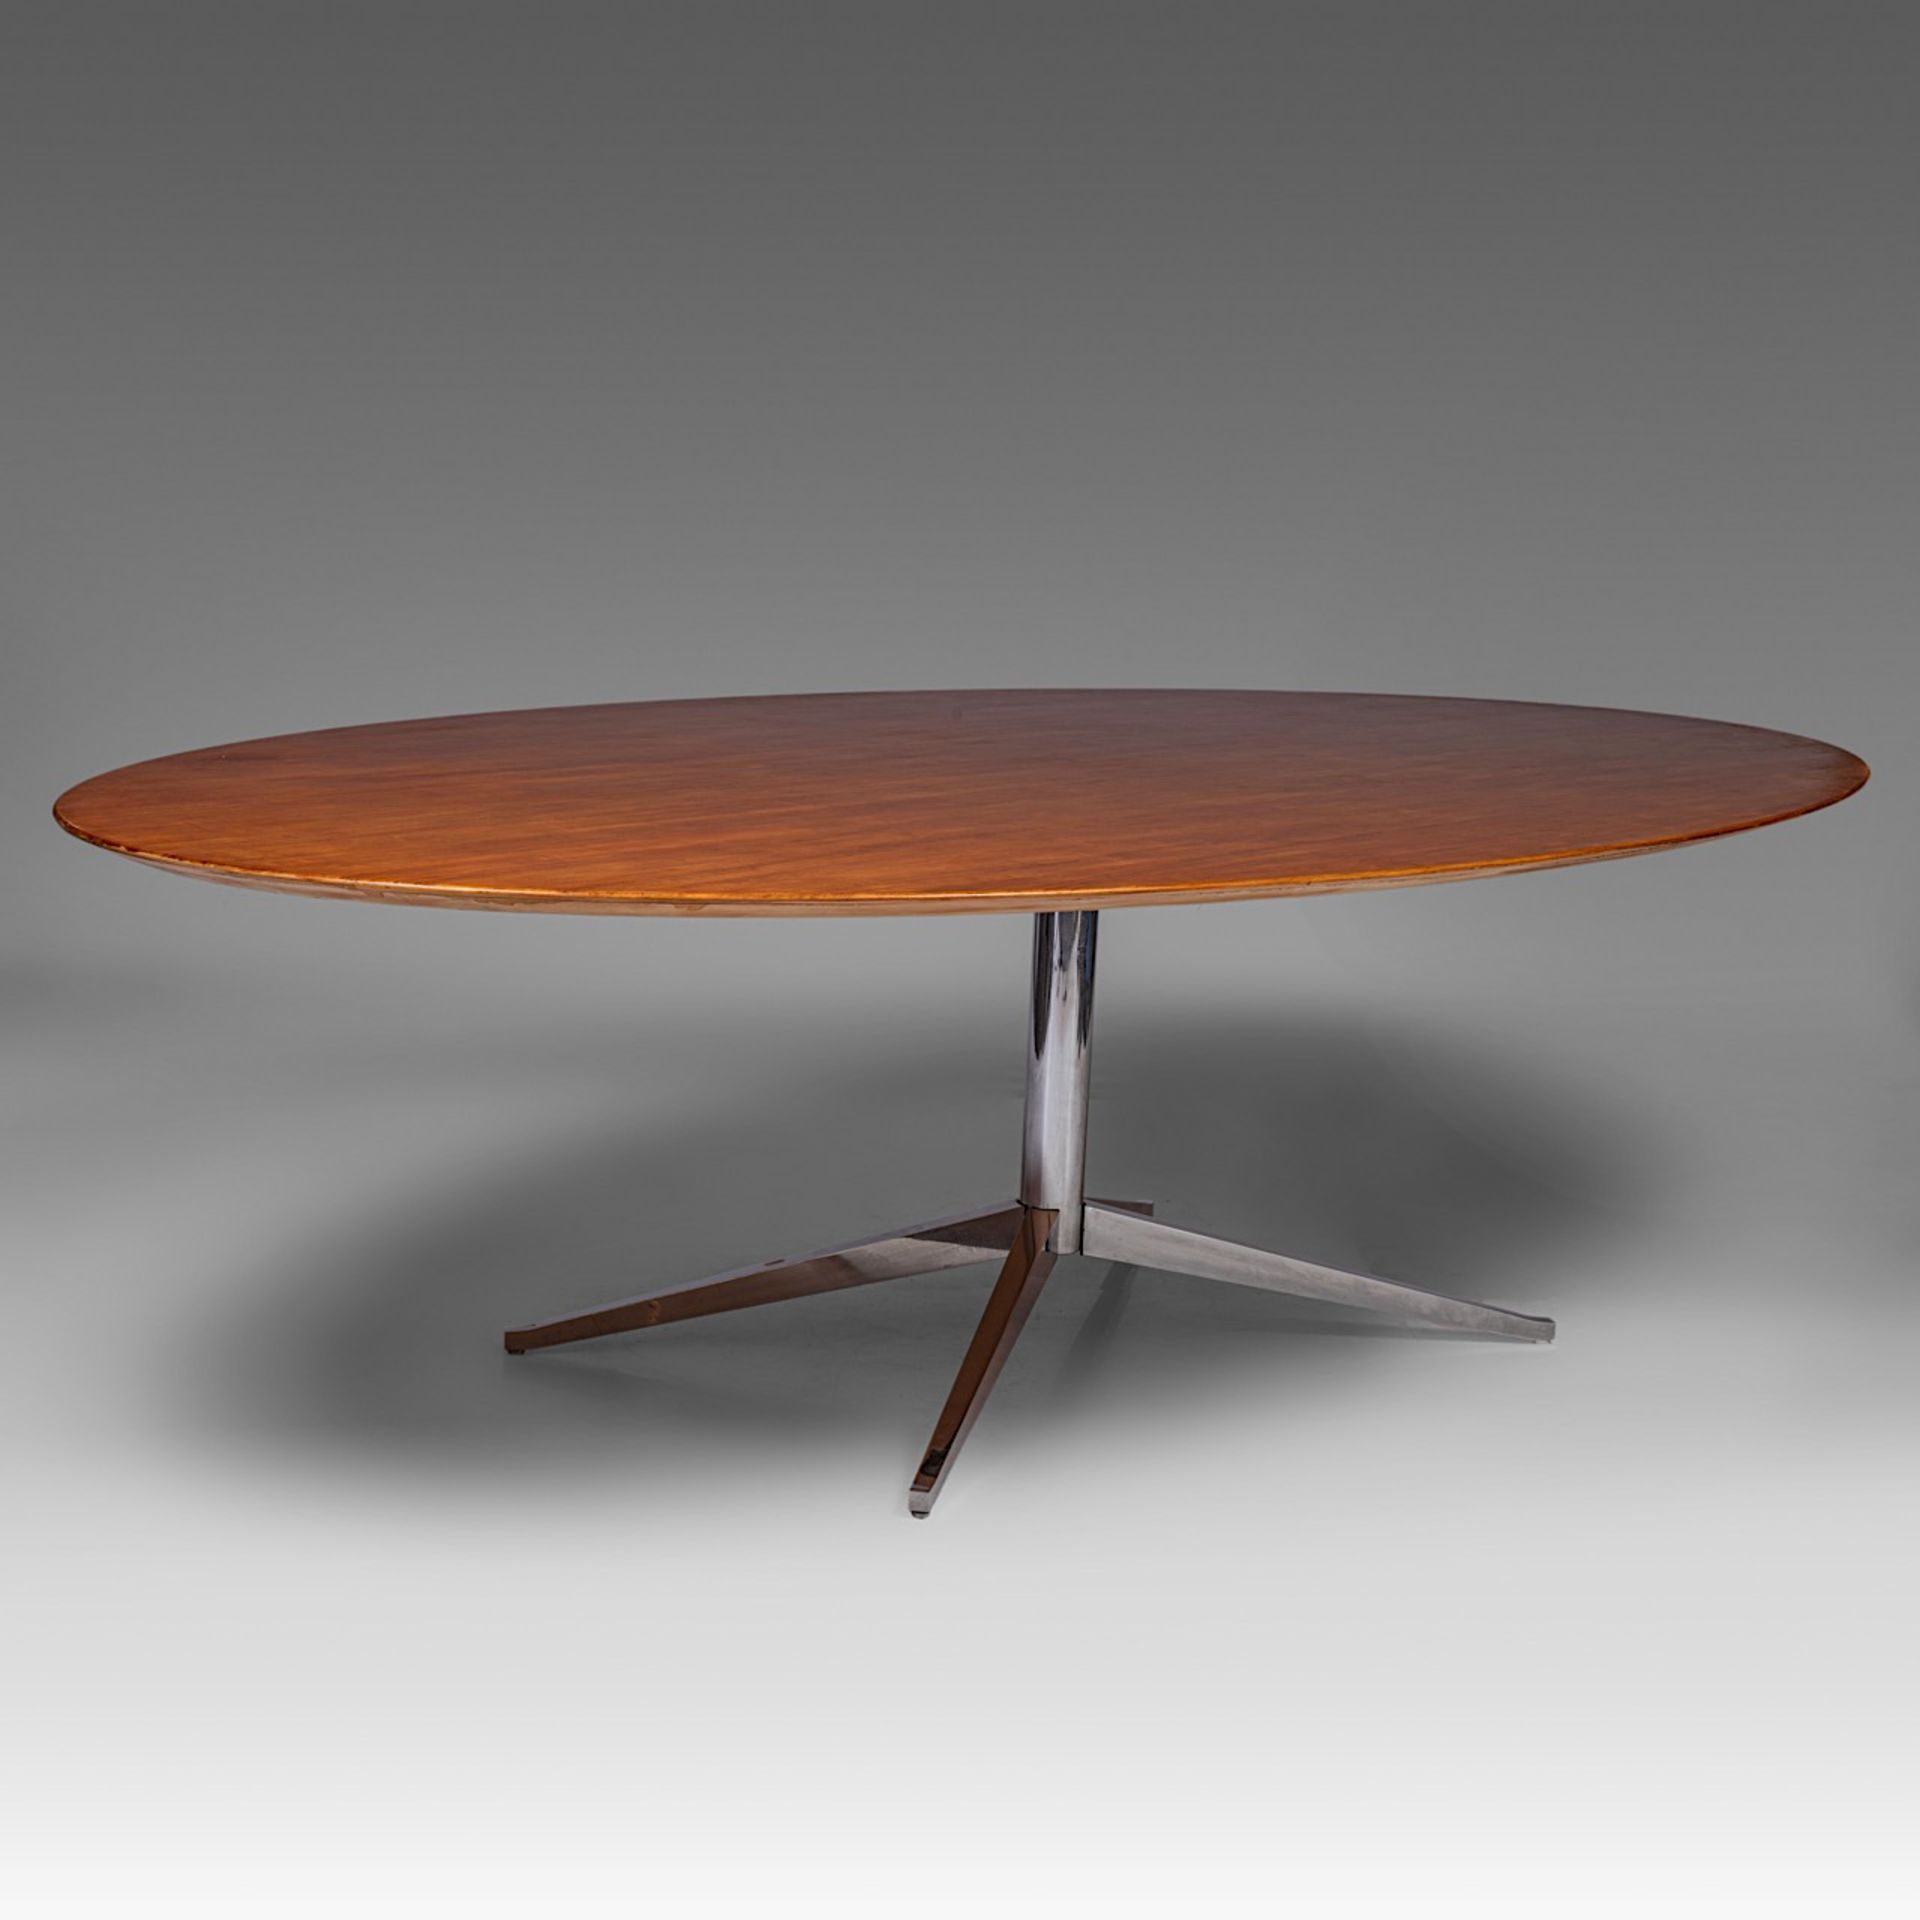 A design dining table by Florence Knoll, walnut table top on a chromed metal frame, H 72 - W 200 - D